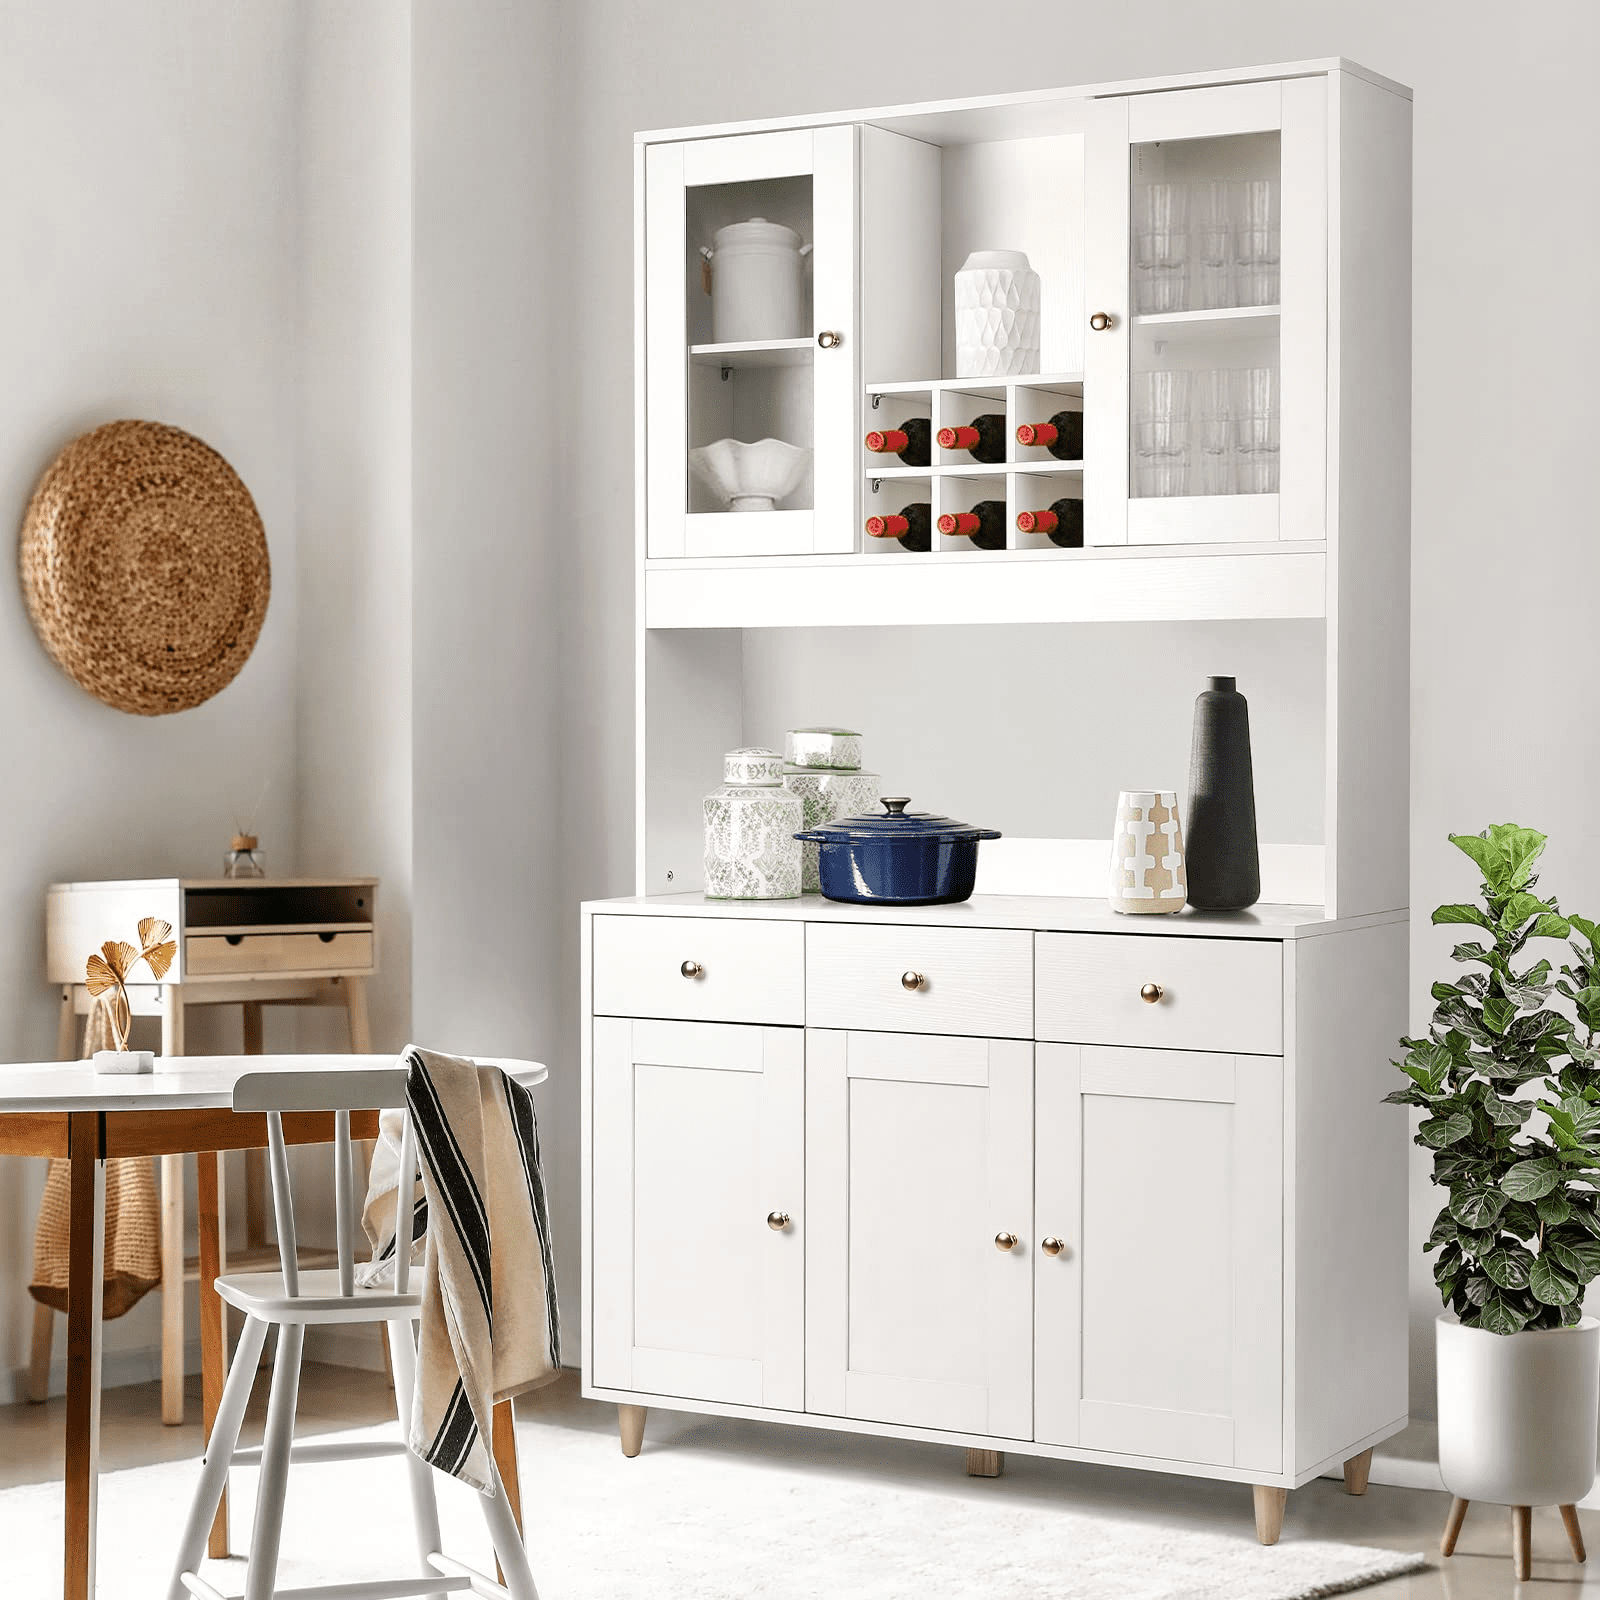 kepptory 51” Pantry Cabinets, White Freestanding Kitchen Pantry Storage  Cabinet with Adjustable Shelves, Buffet Cupboards Storage Cabinet for Home